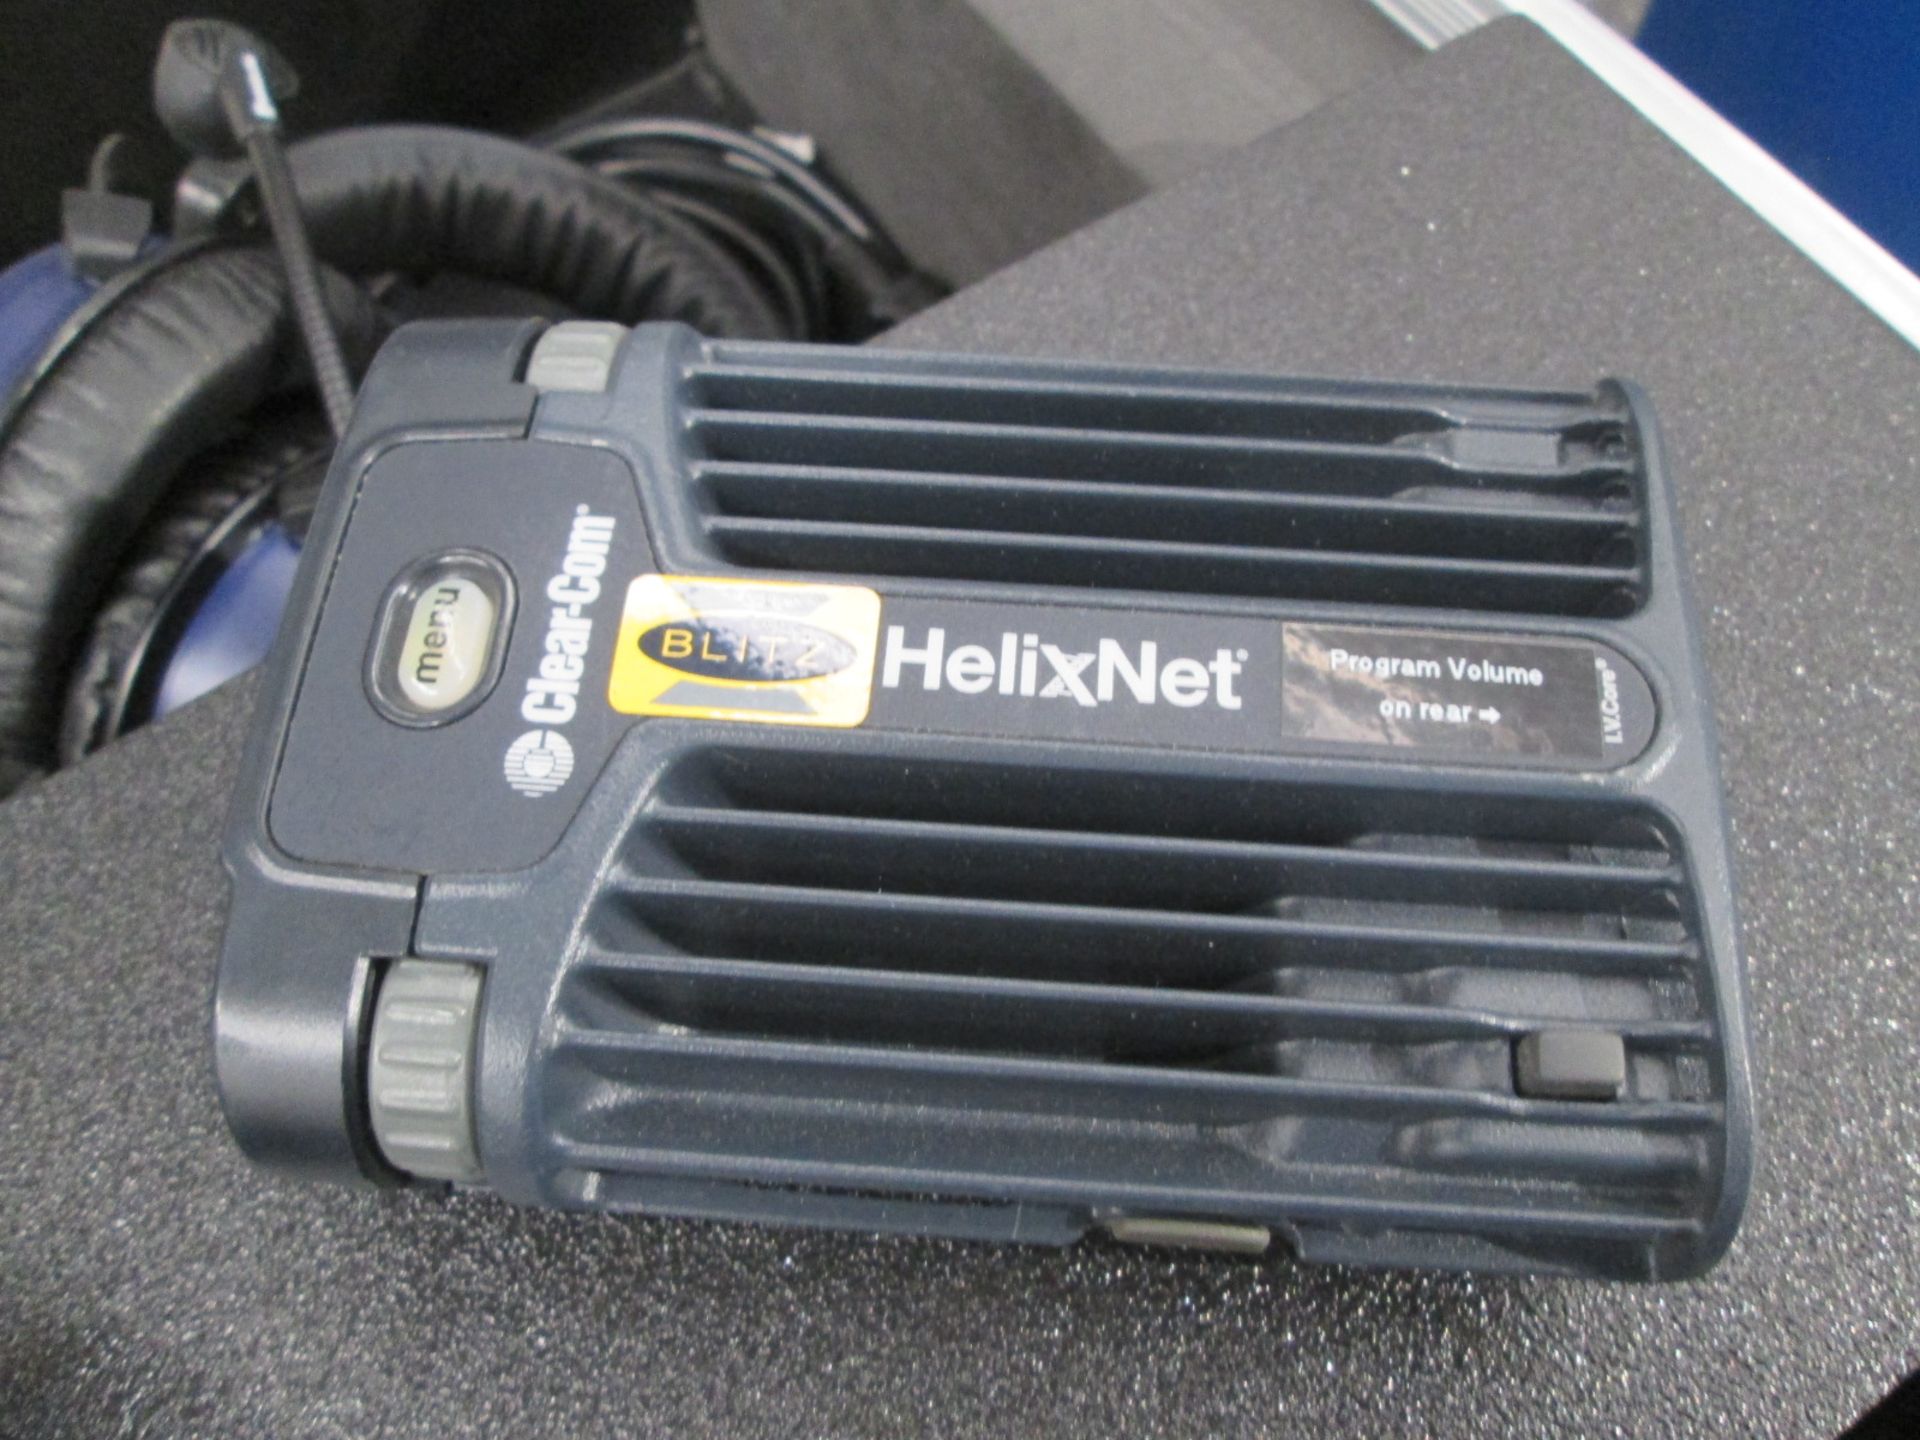 Clear-Com HelixNet Radio System, To include HRM-4X base station, 2 x HBP-2X belt packs, 2 x - Image 5 of 7